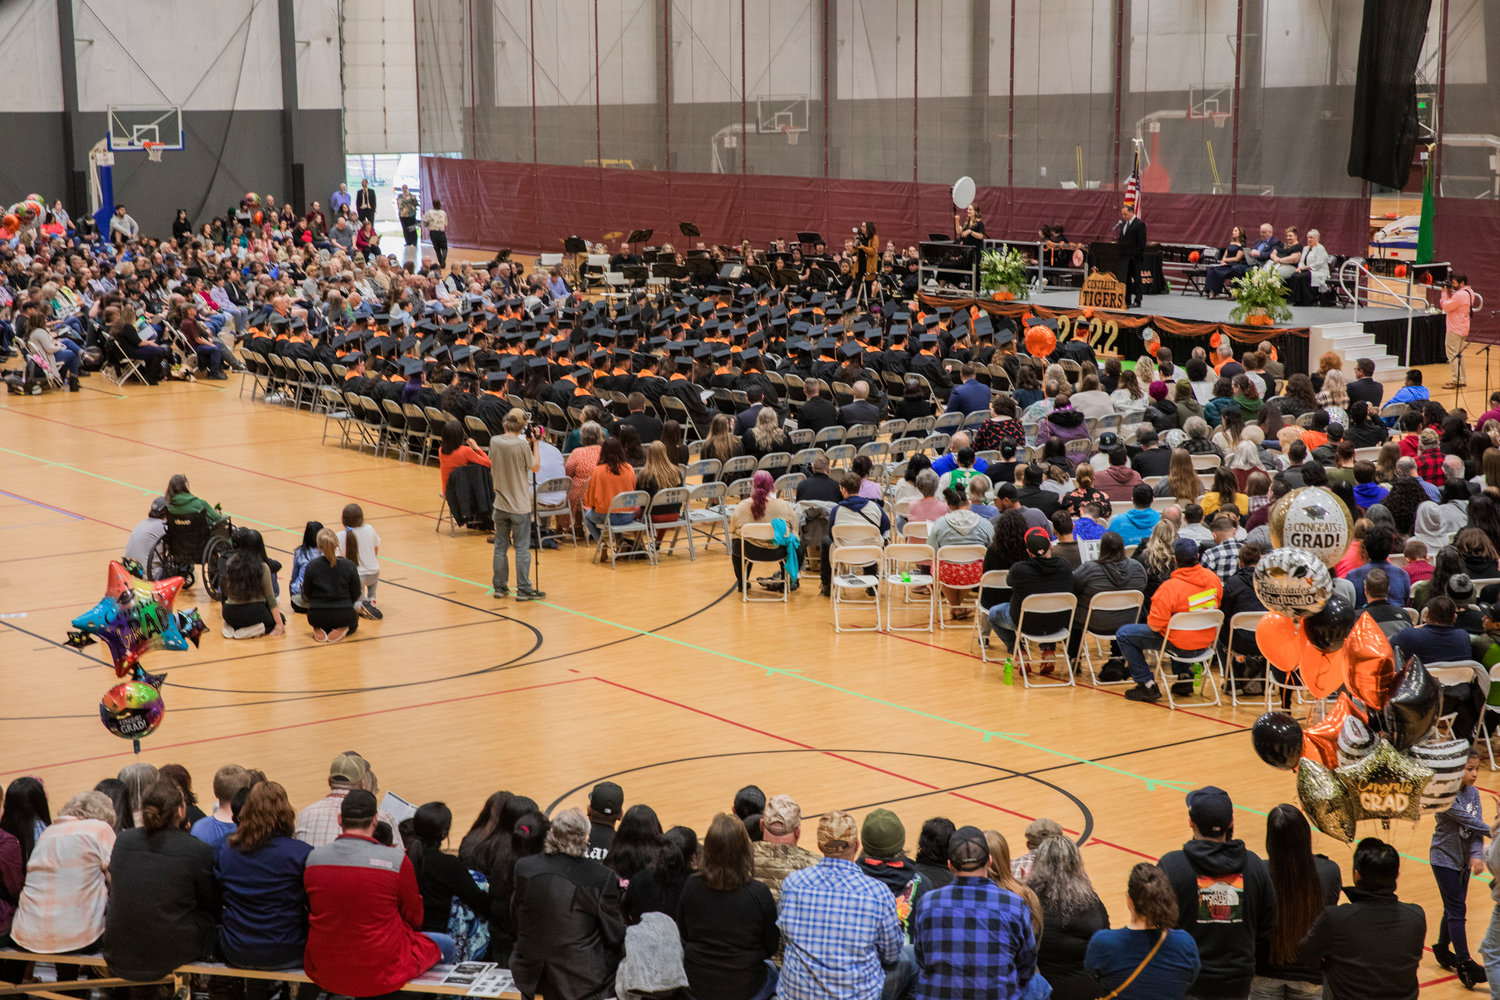 Graduates and attendees listen as Josue Lowe introduces speakers during a graduation ceremony in Centralia earlier this month.